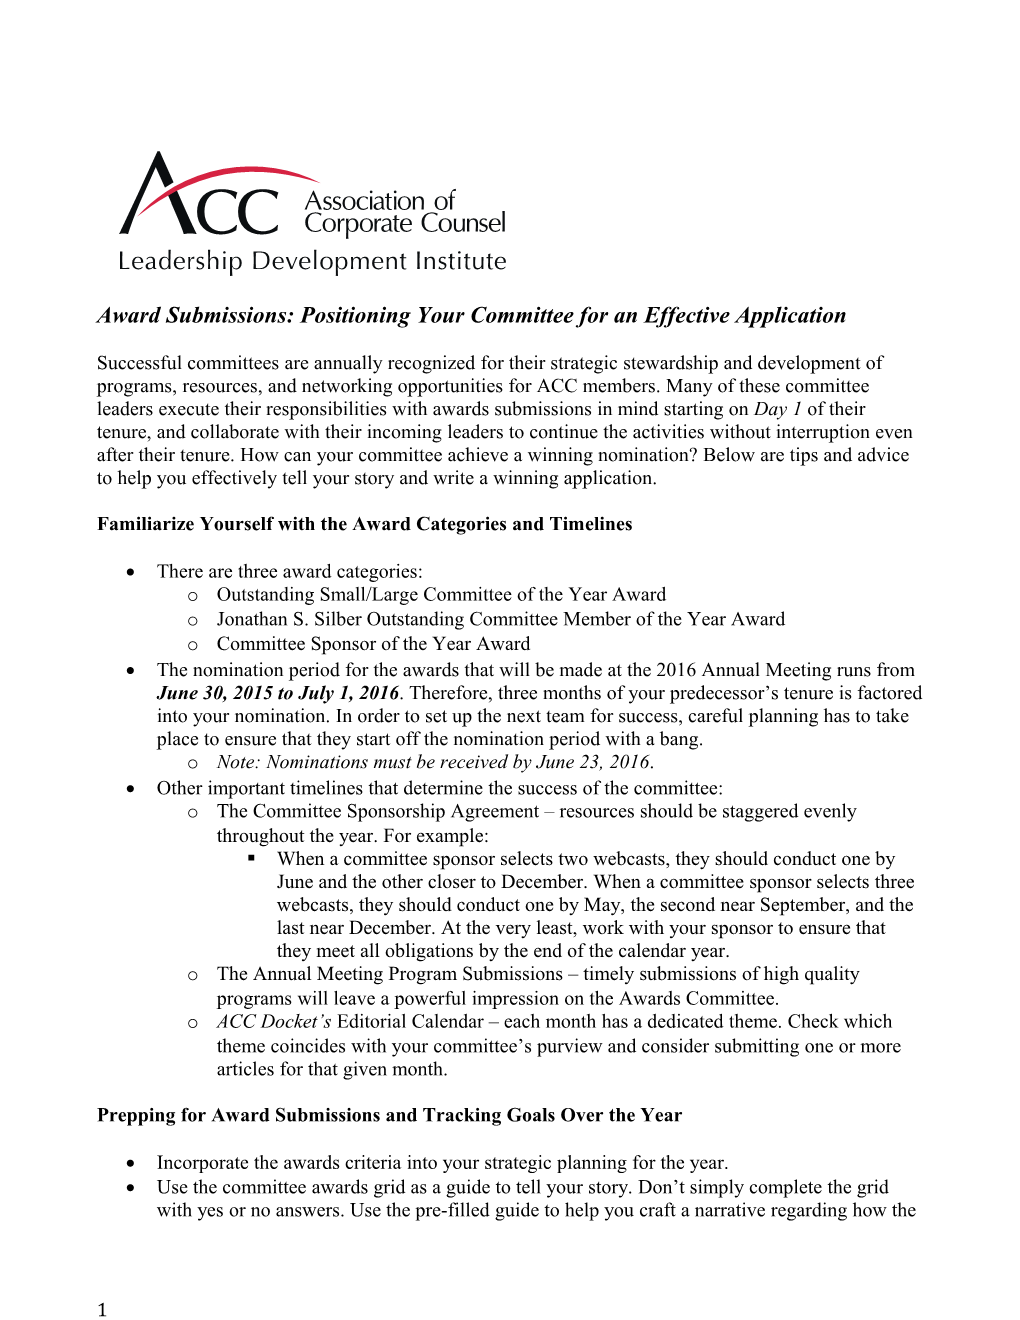 Award Submissions: Positioning Your Committee for an Effective Application